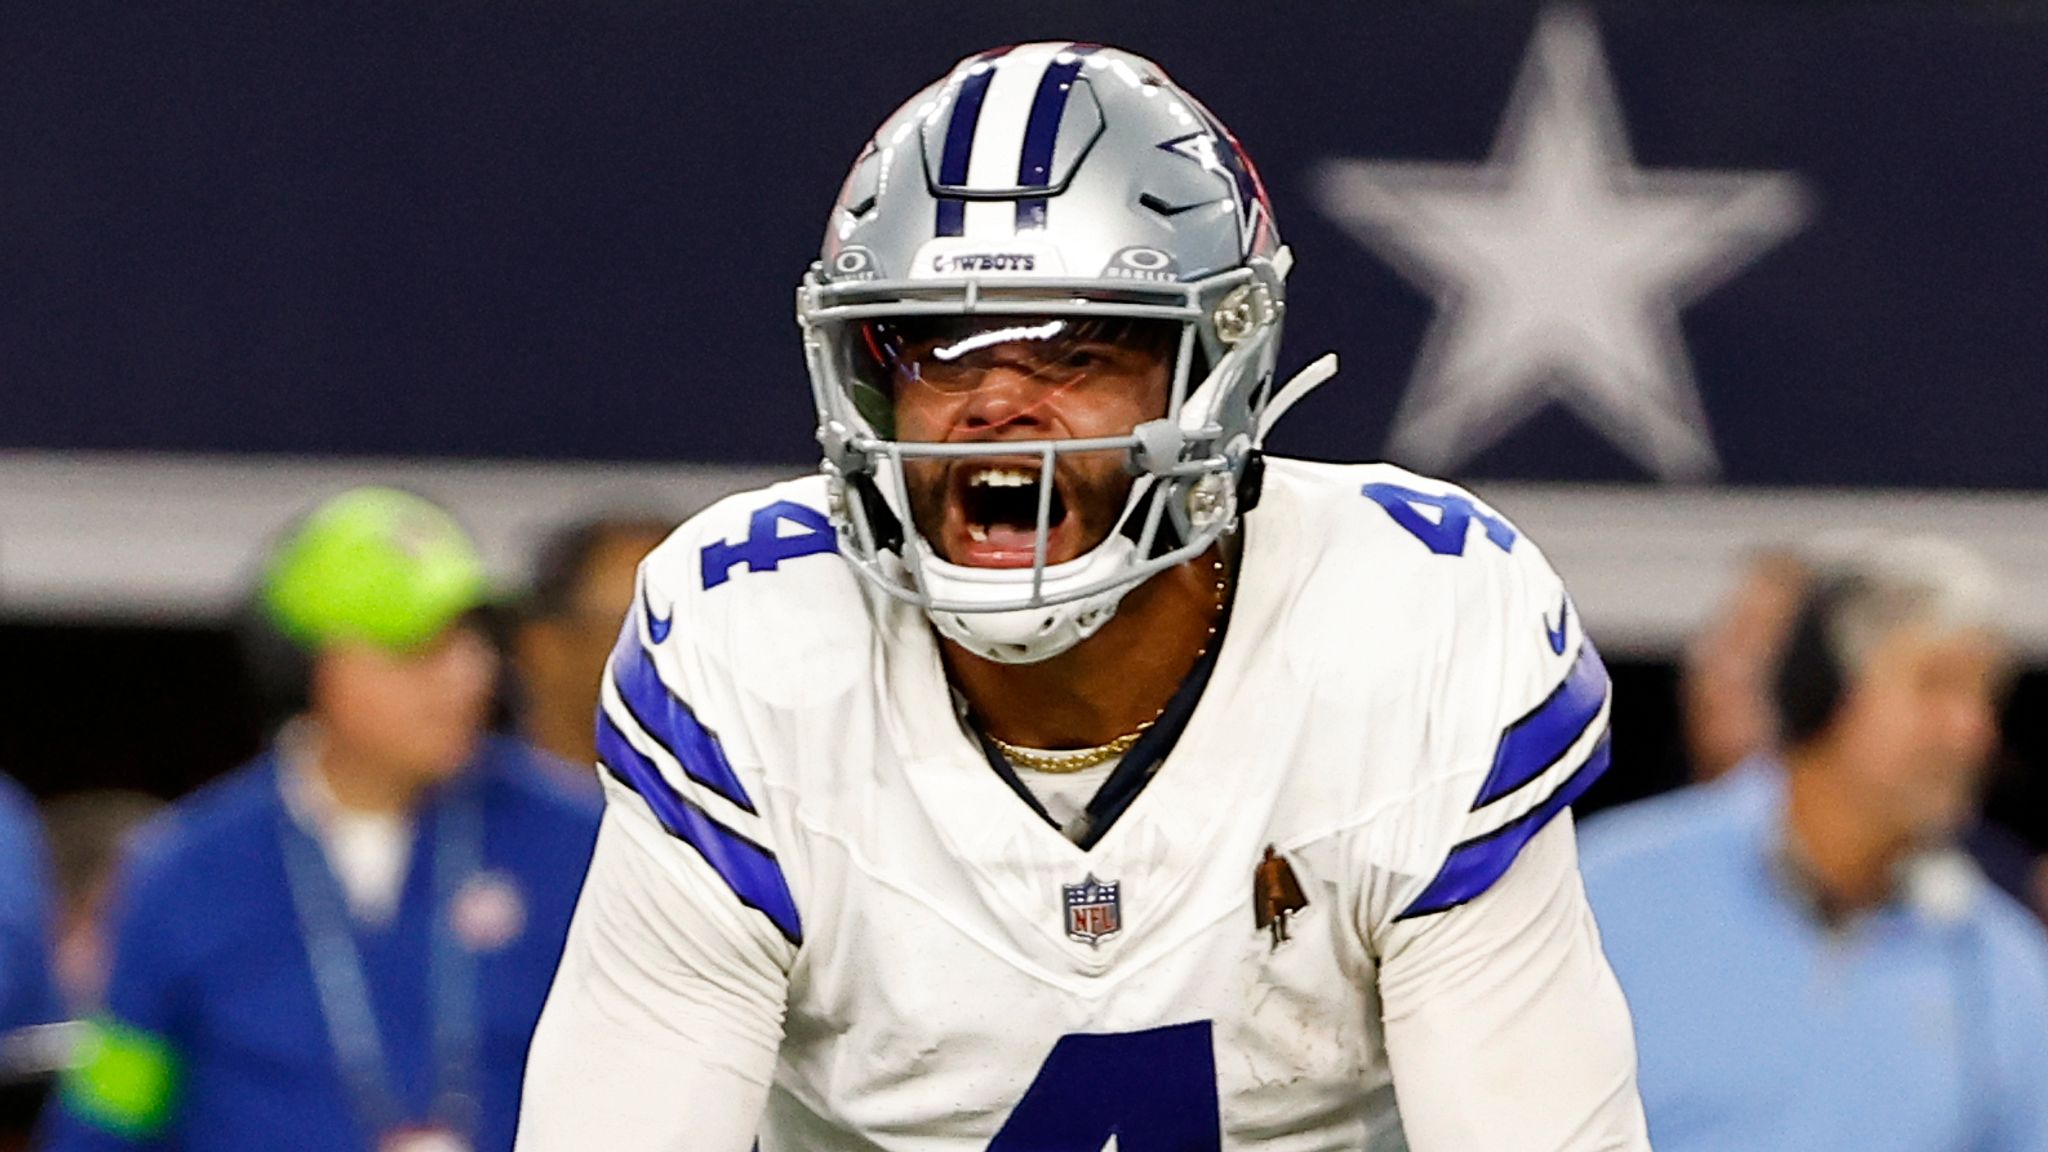 Dak Prescott throws for 3 TDs, Cowboys extend home win streak to 14 with  41-35 win over Seahawks